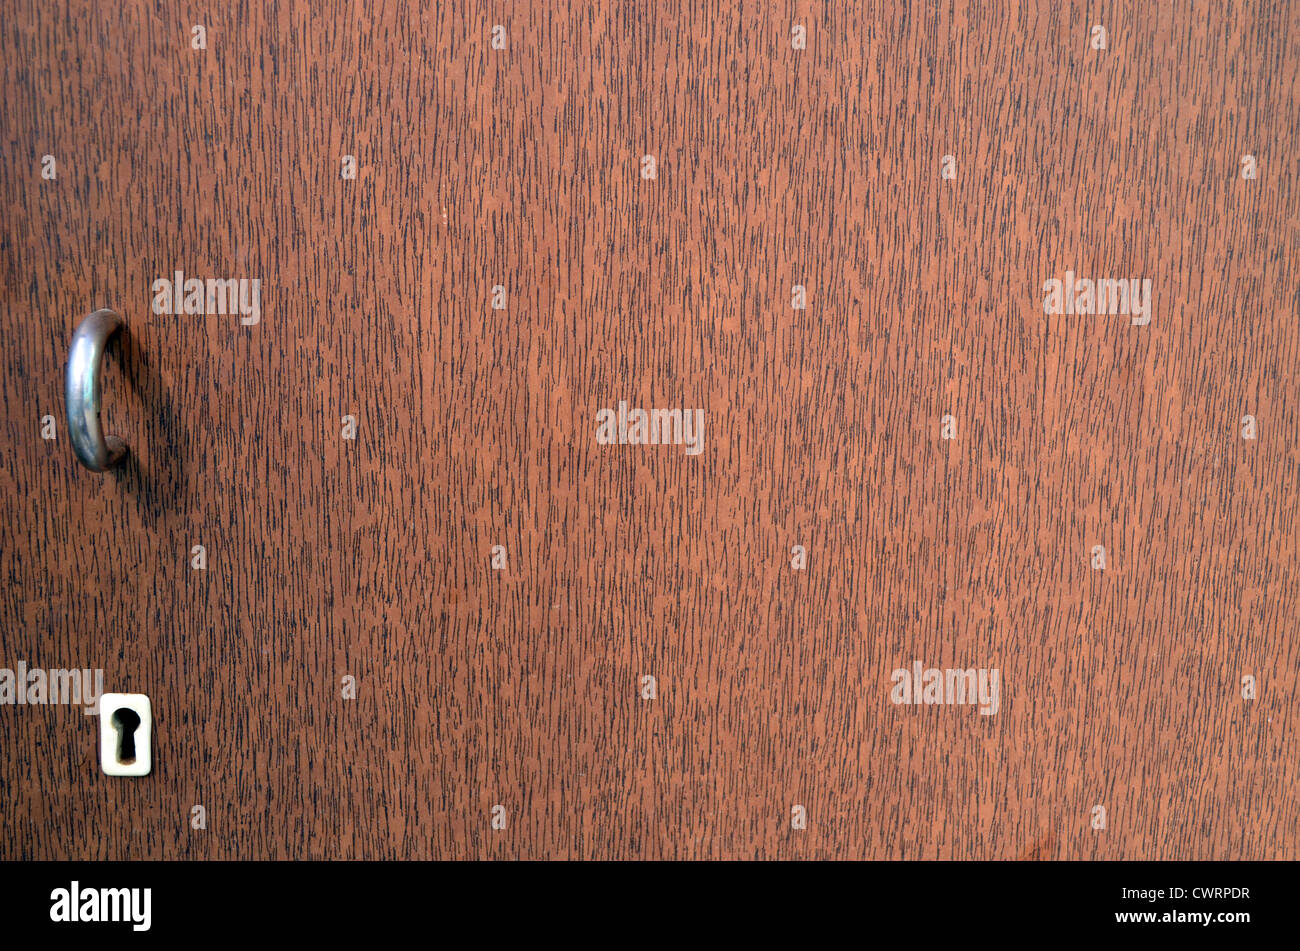 Retro wooden brown cupboard key hole and door handle background. Stock Photo